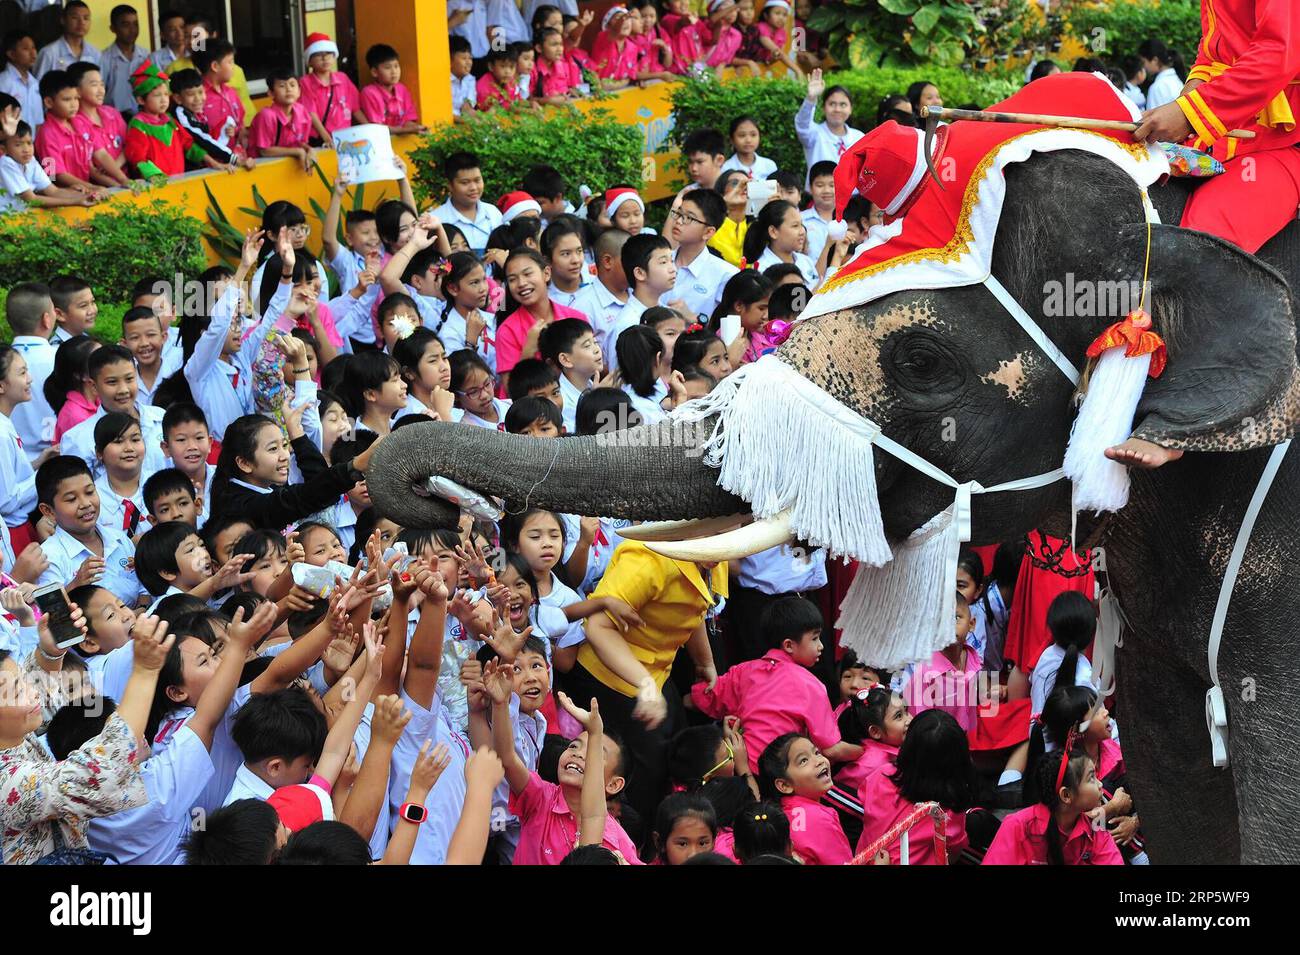 (181224) -- AYUTTHAYA, Dec. 24, 2018 (Xinhua) -- An elephant distributes gifts to students during Christmas celebrations at a school in Ayutthaya province, Thailand, Dec. 24, 2018. The annual event is held to celebrate Christmas and promote tourism in Ayutthaya. (Xinhua/Rachen Sageamsak) THAILAND-AYUTTHAYA-CHRISTMAS PUBLICATIONxNOTxINxCHN Stock Photo